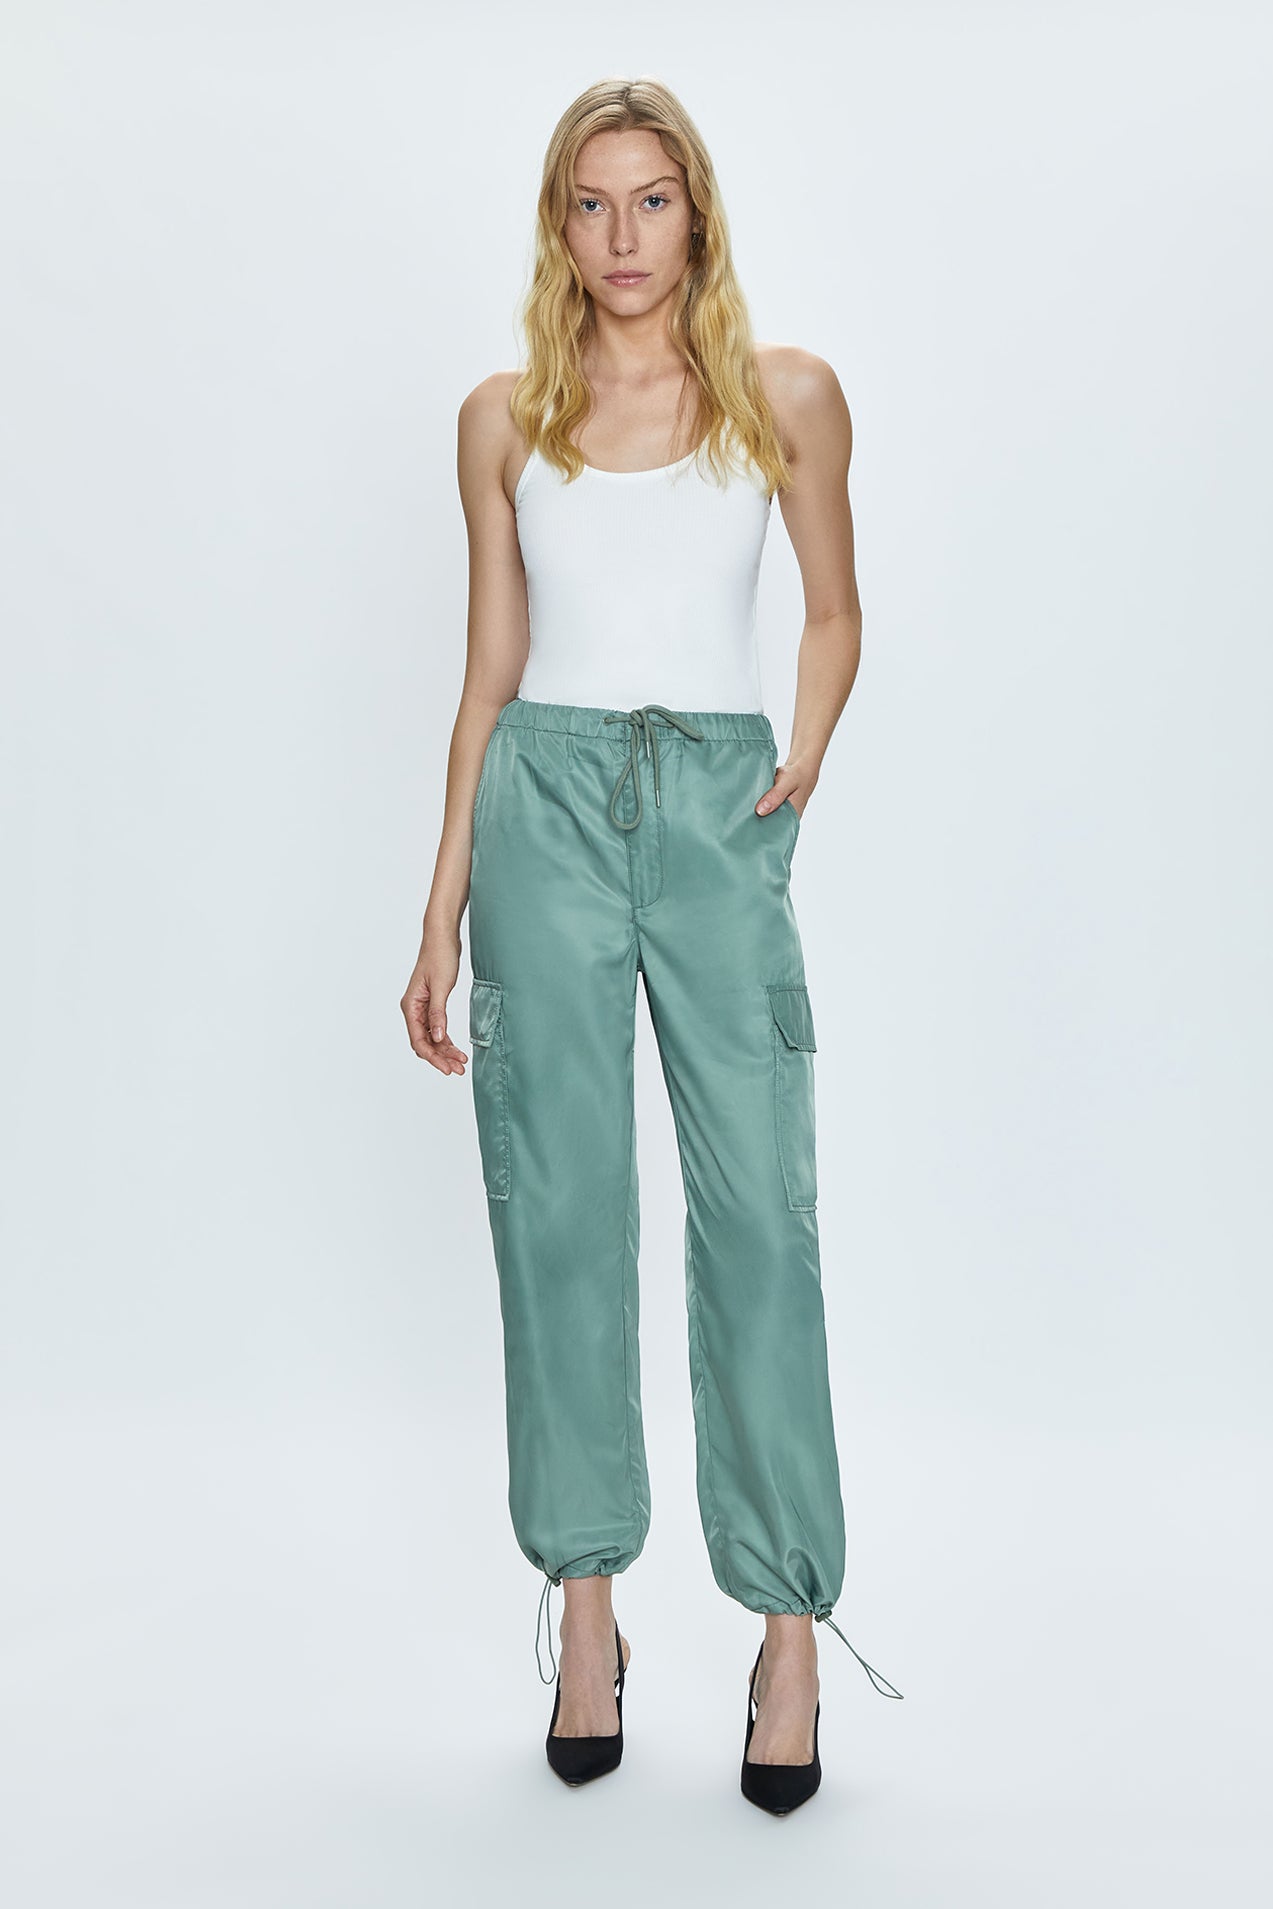 Zara Cargo Pants (Small) Stretch Waits, And Ankles for Sale in